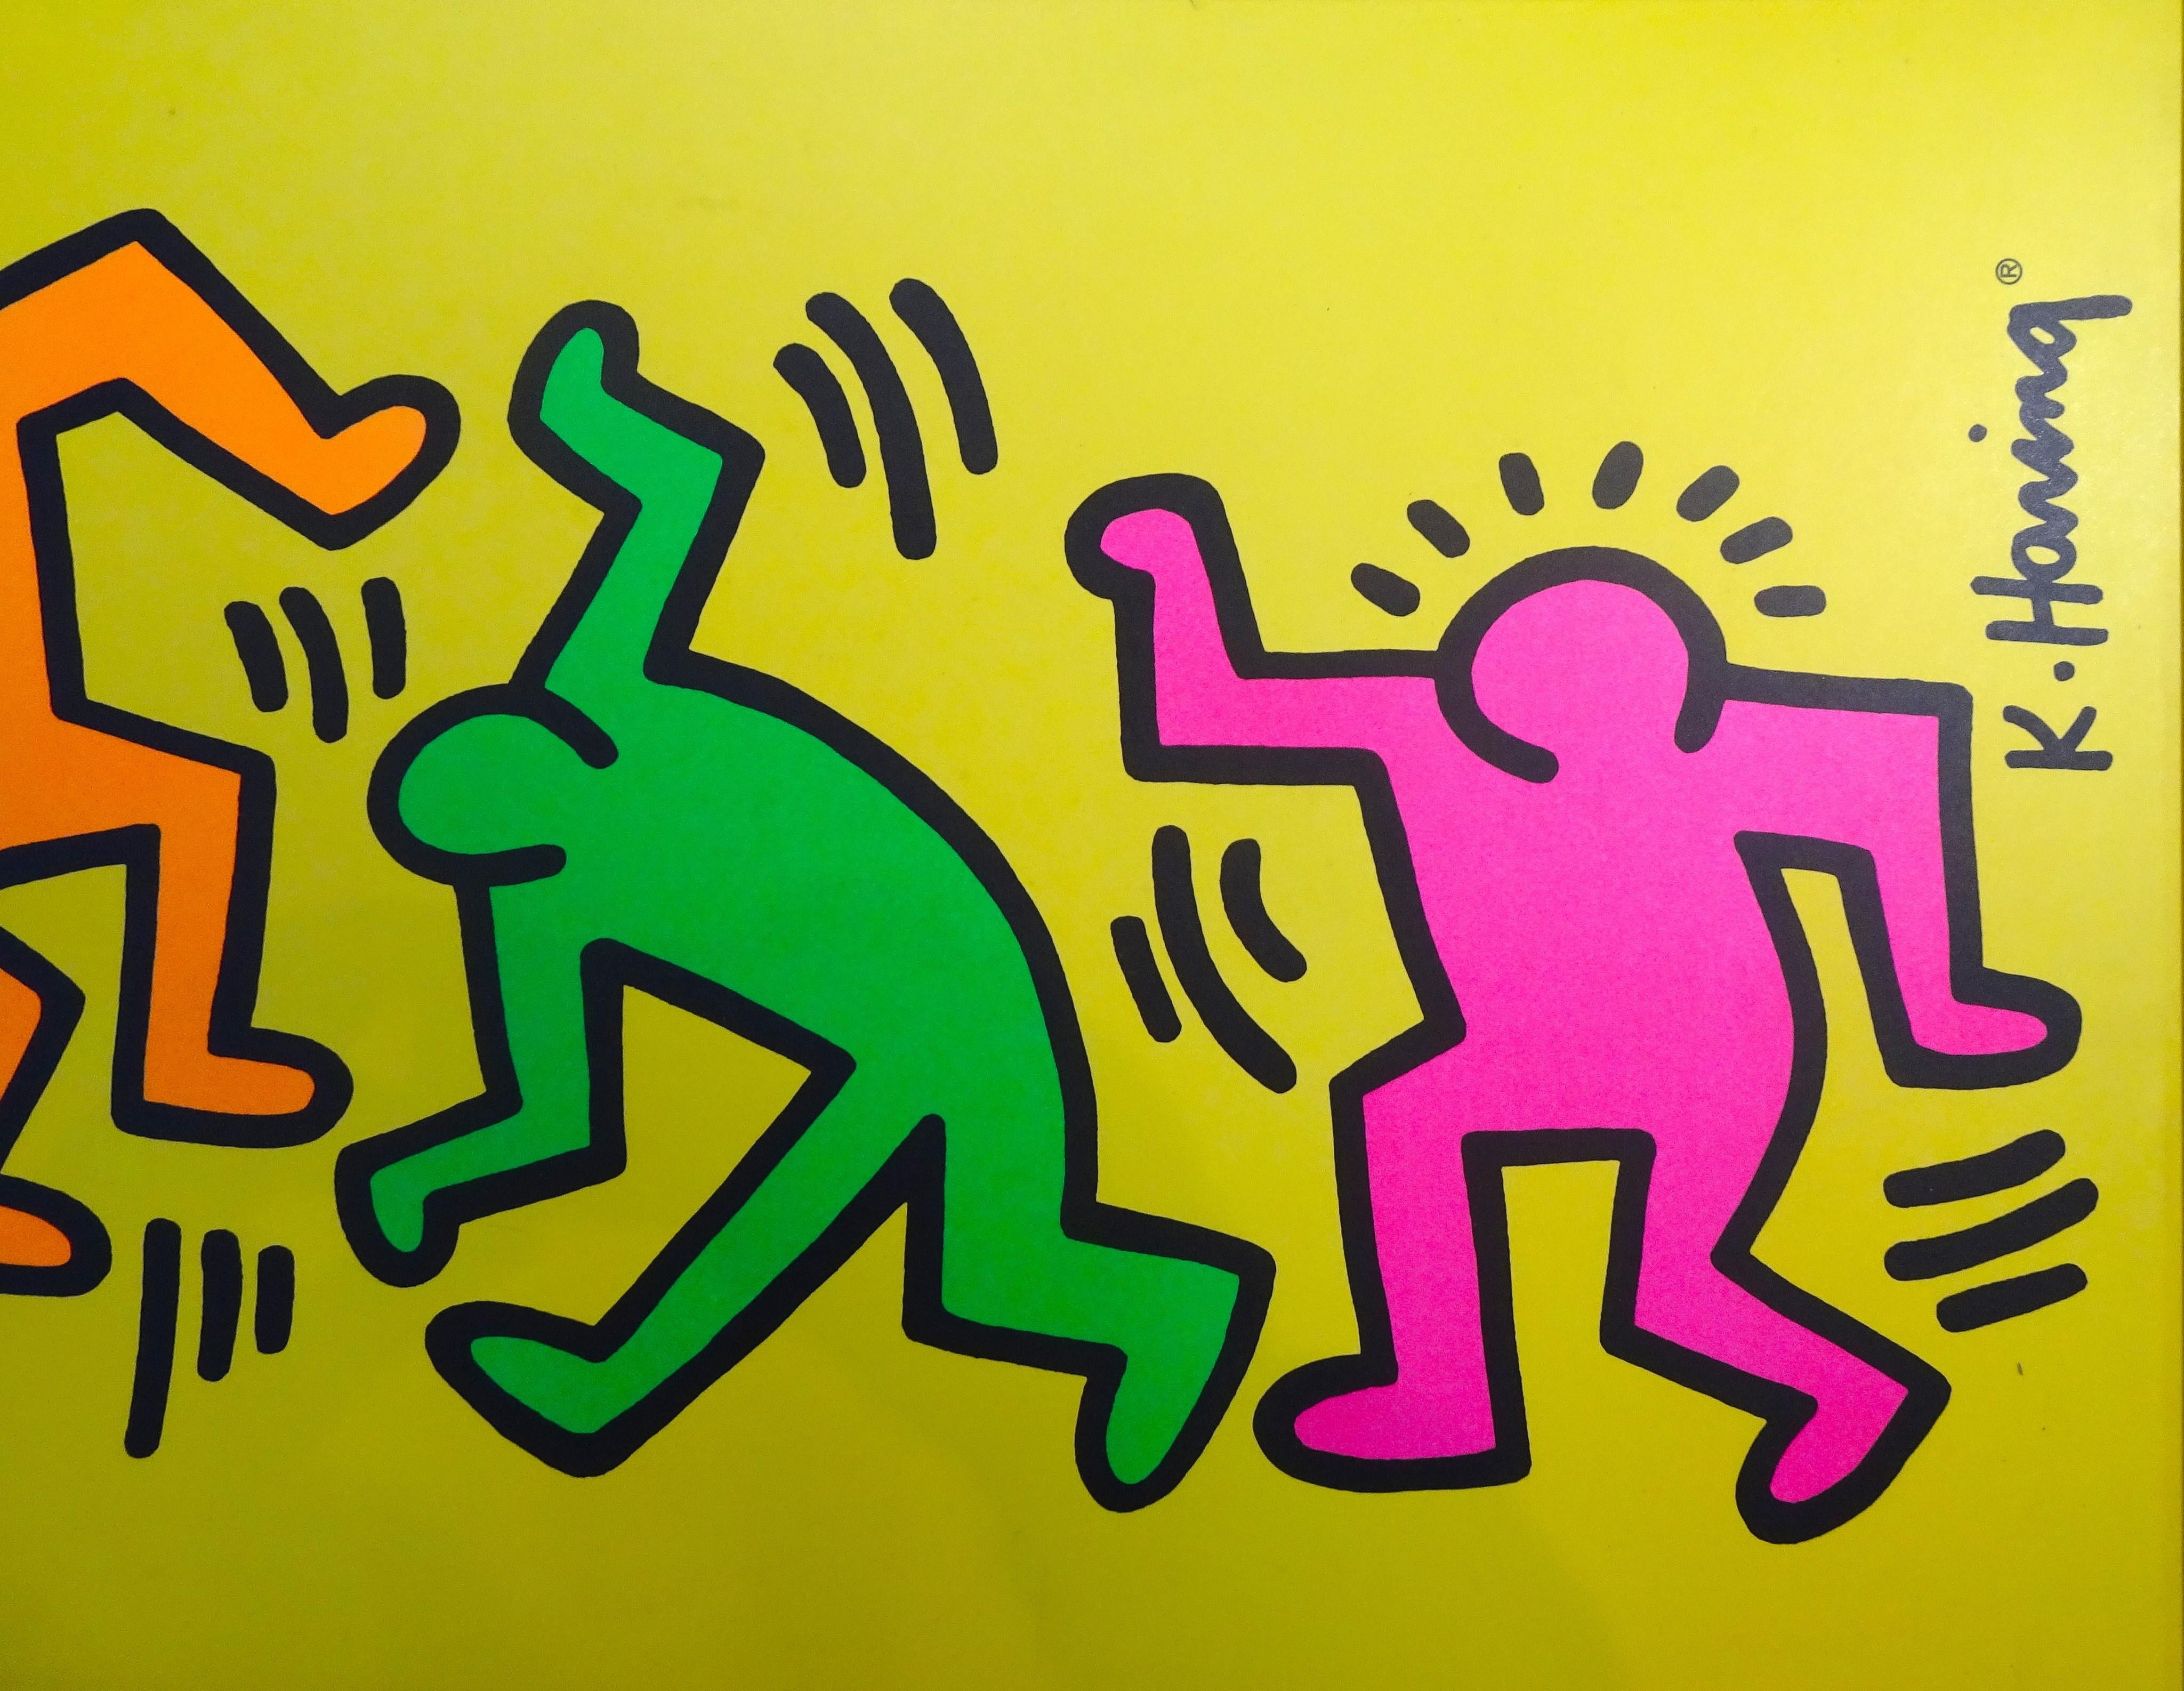 Beautiful colored serigraph Figures made by the street artist Keith Haring.
Signed on plate. Unnumbered.
Very good conditions, except for a small rip on the higher right. Frame splintered on the upper right.

Image Dimensions : 50 x 120 cm